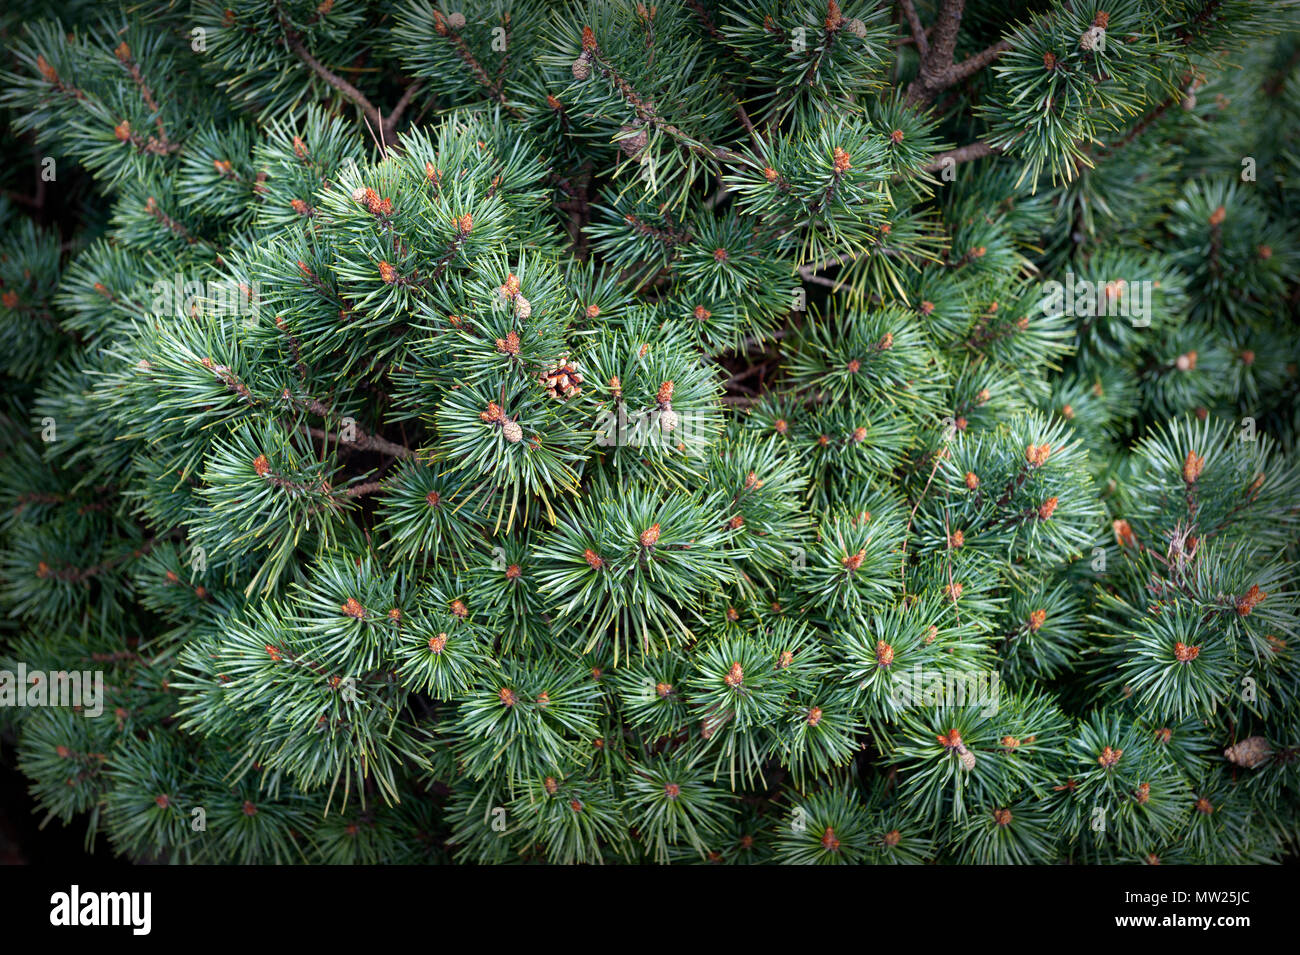 Closeup of fir branches with little pinecones on pine needles as background ornament for Christmas and holiday decoration Stock Photo